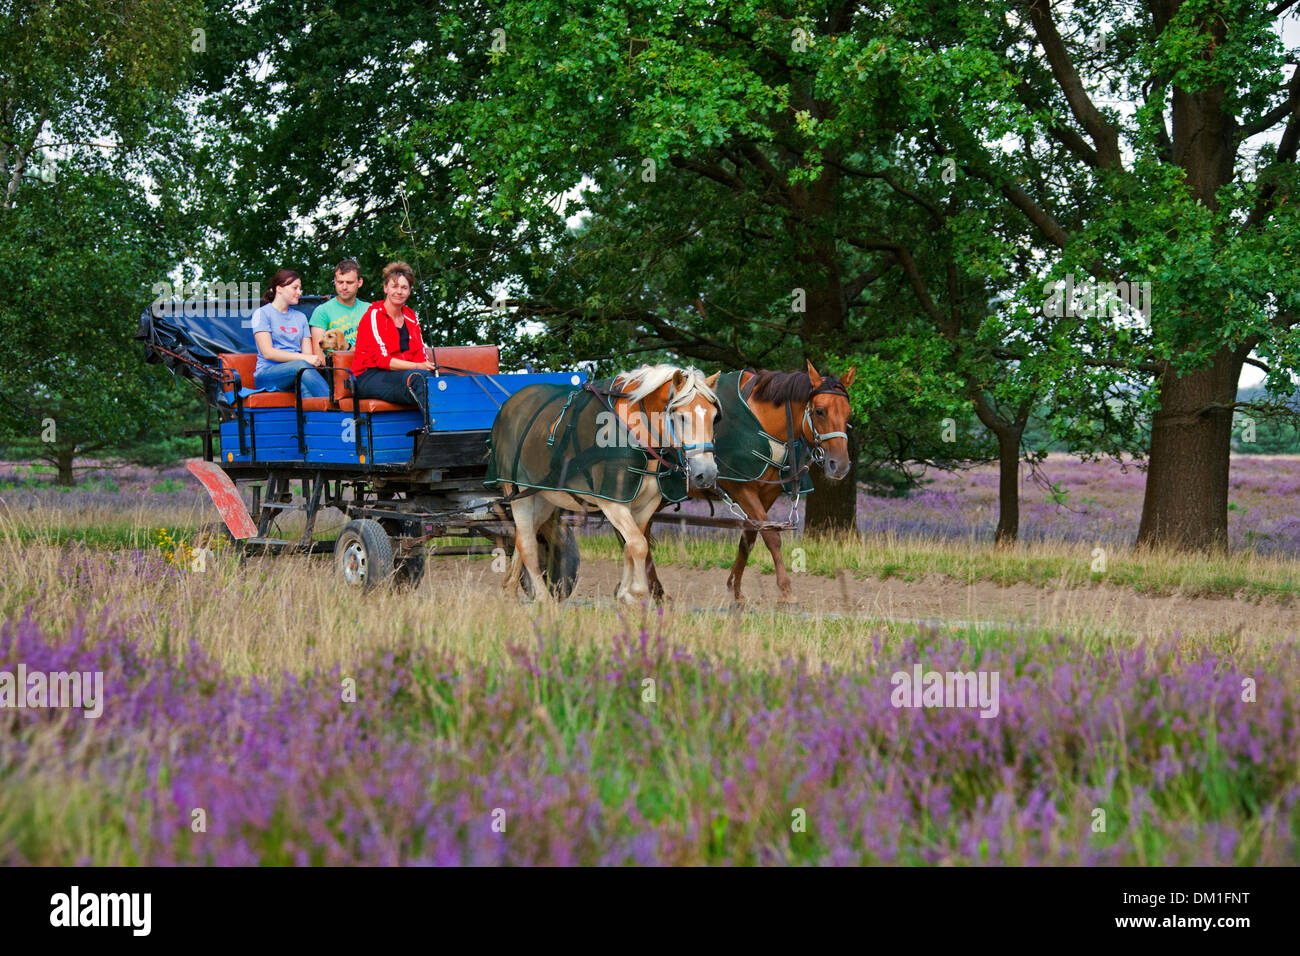 Horse-drawn carriage with tourists riding through Lüneburg Heath / Lunenburg Heathland in summer with heather flowering, Germany Stock Photo